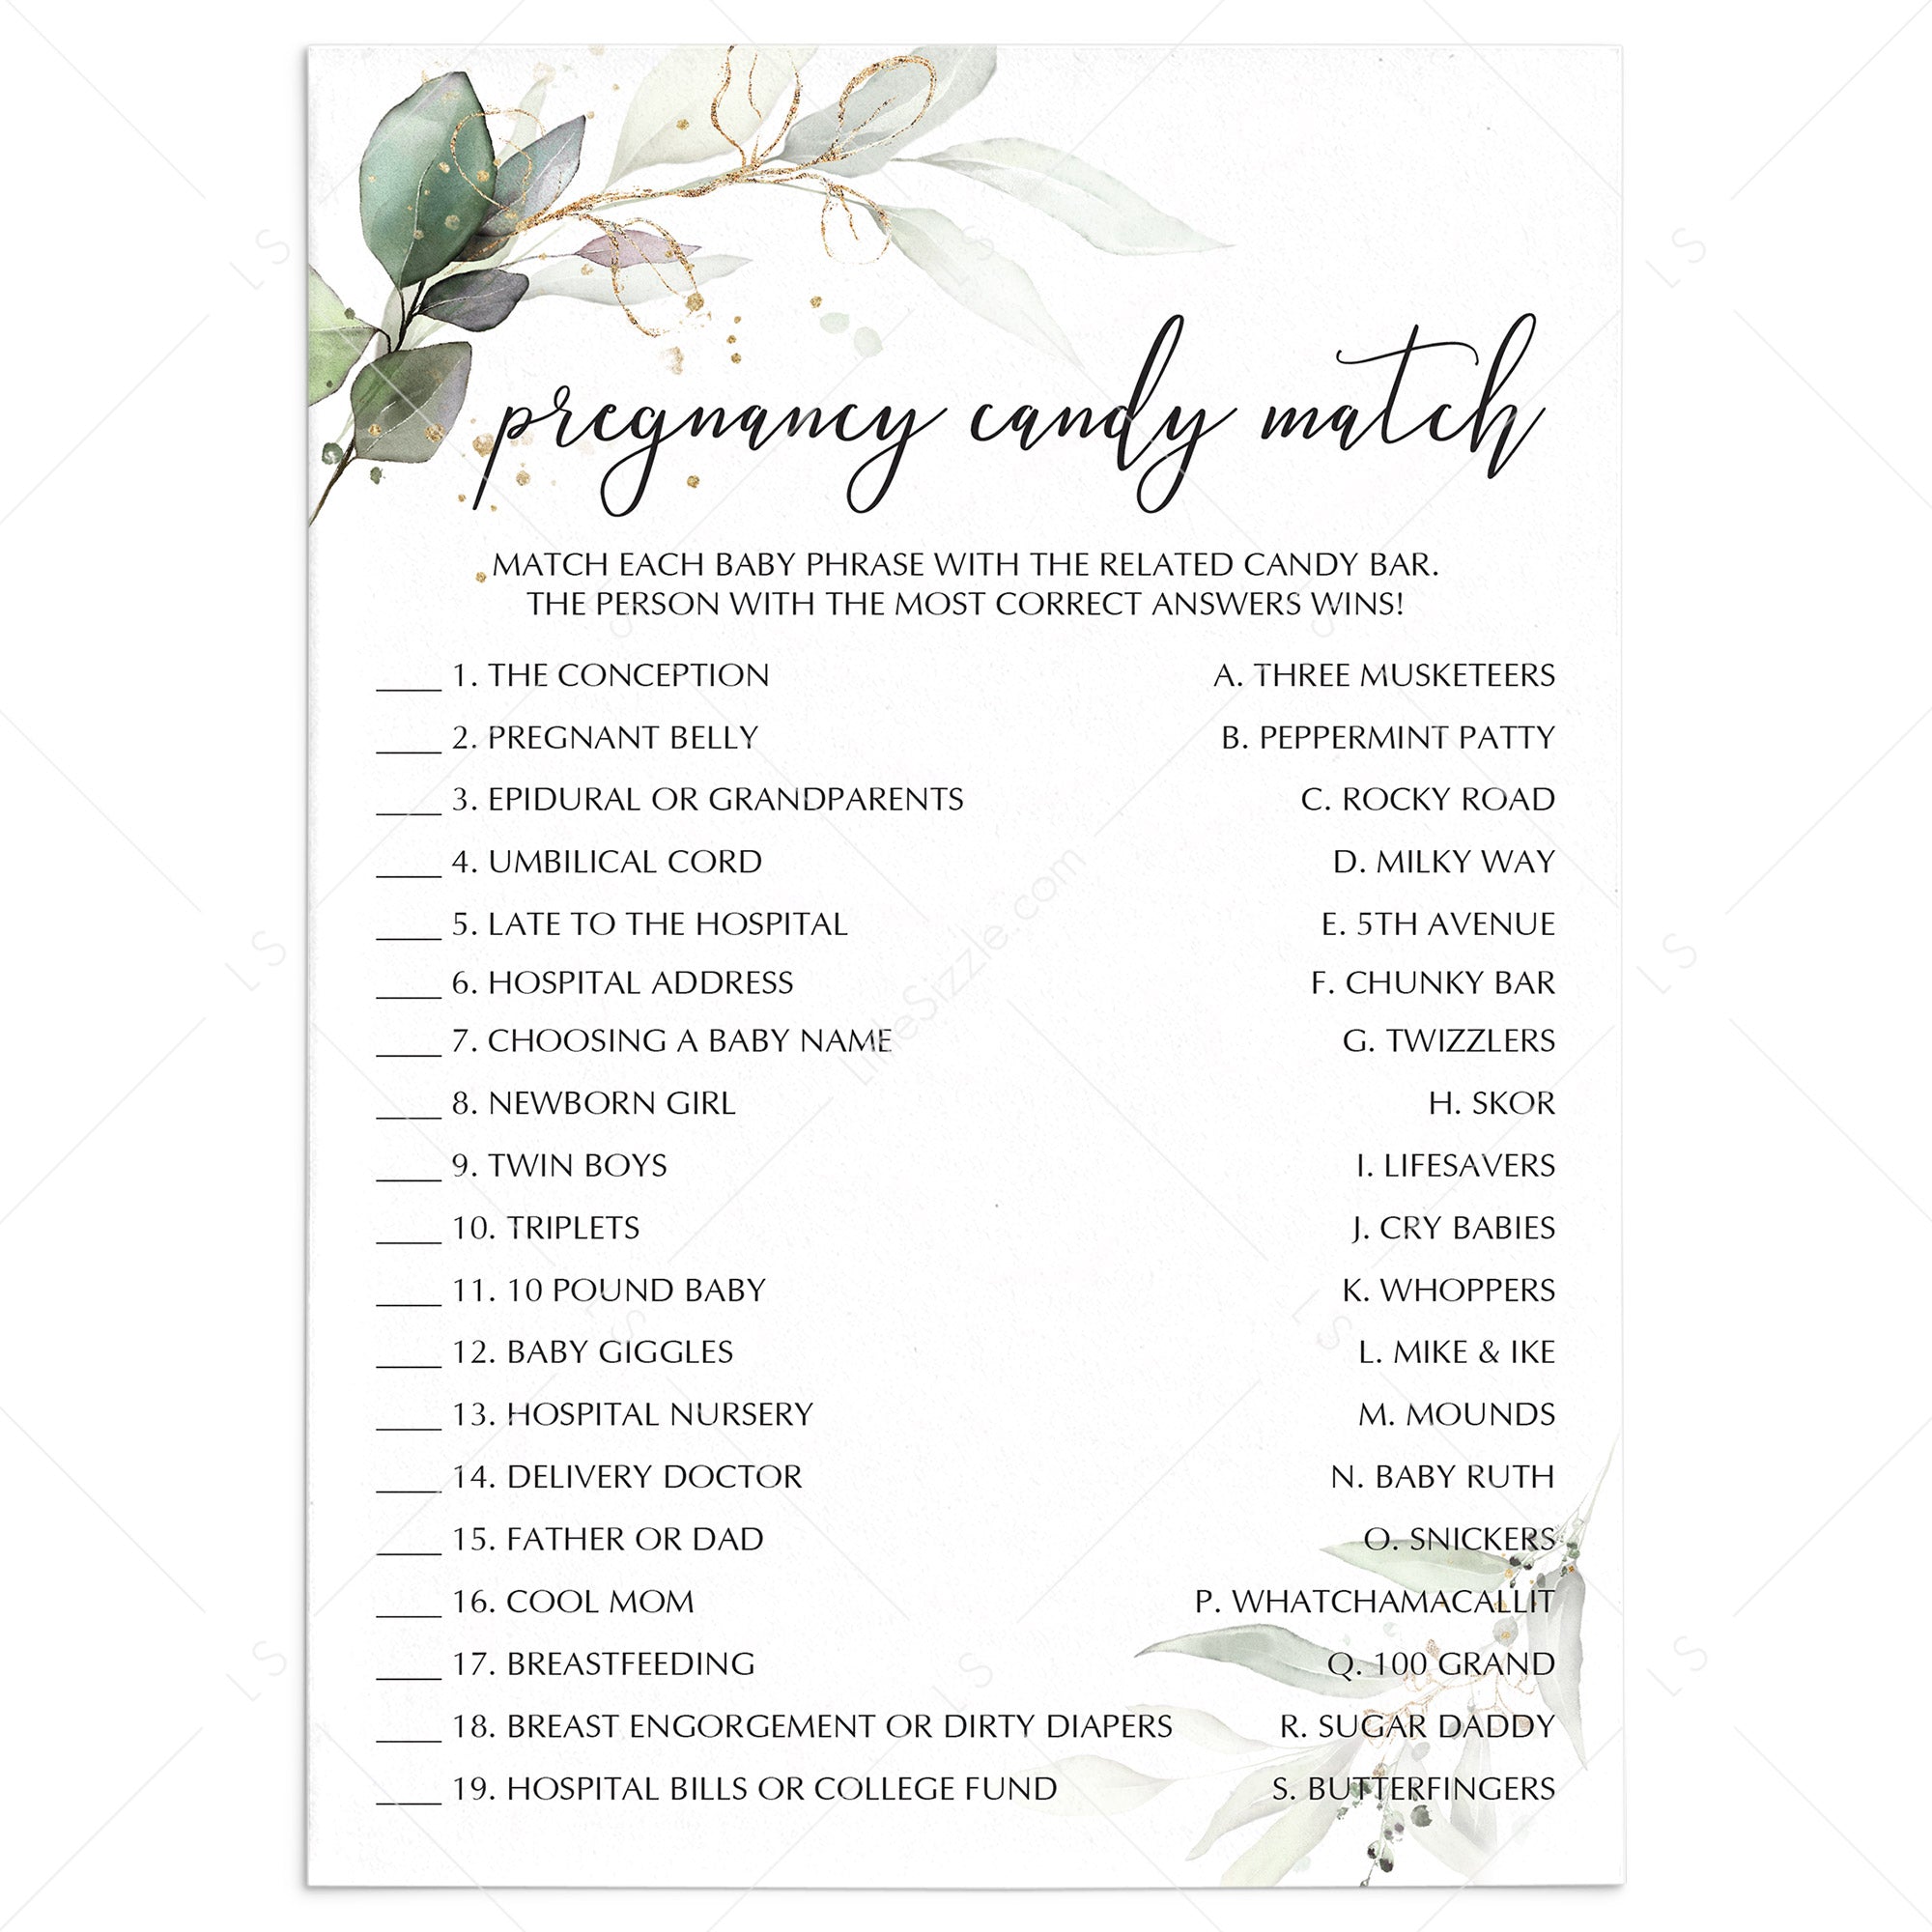 Greenery Gold Baby Shower Game Pregnancy Candy Match by LittleSizzle